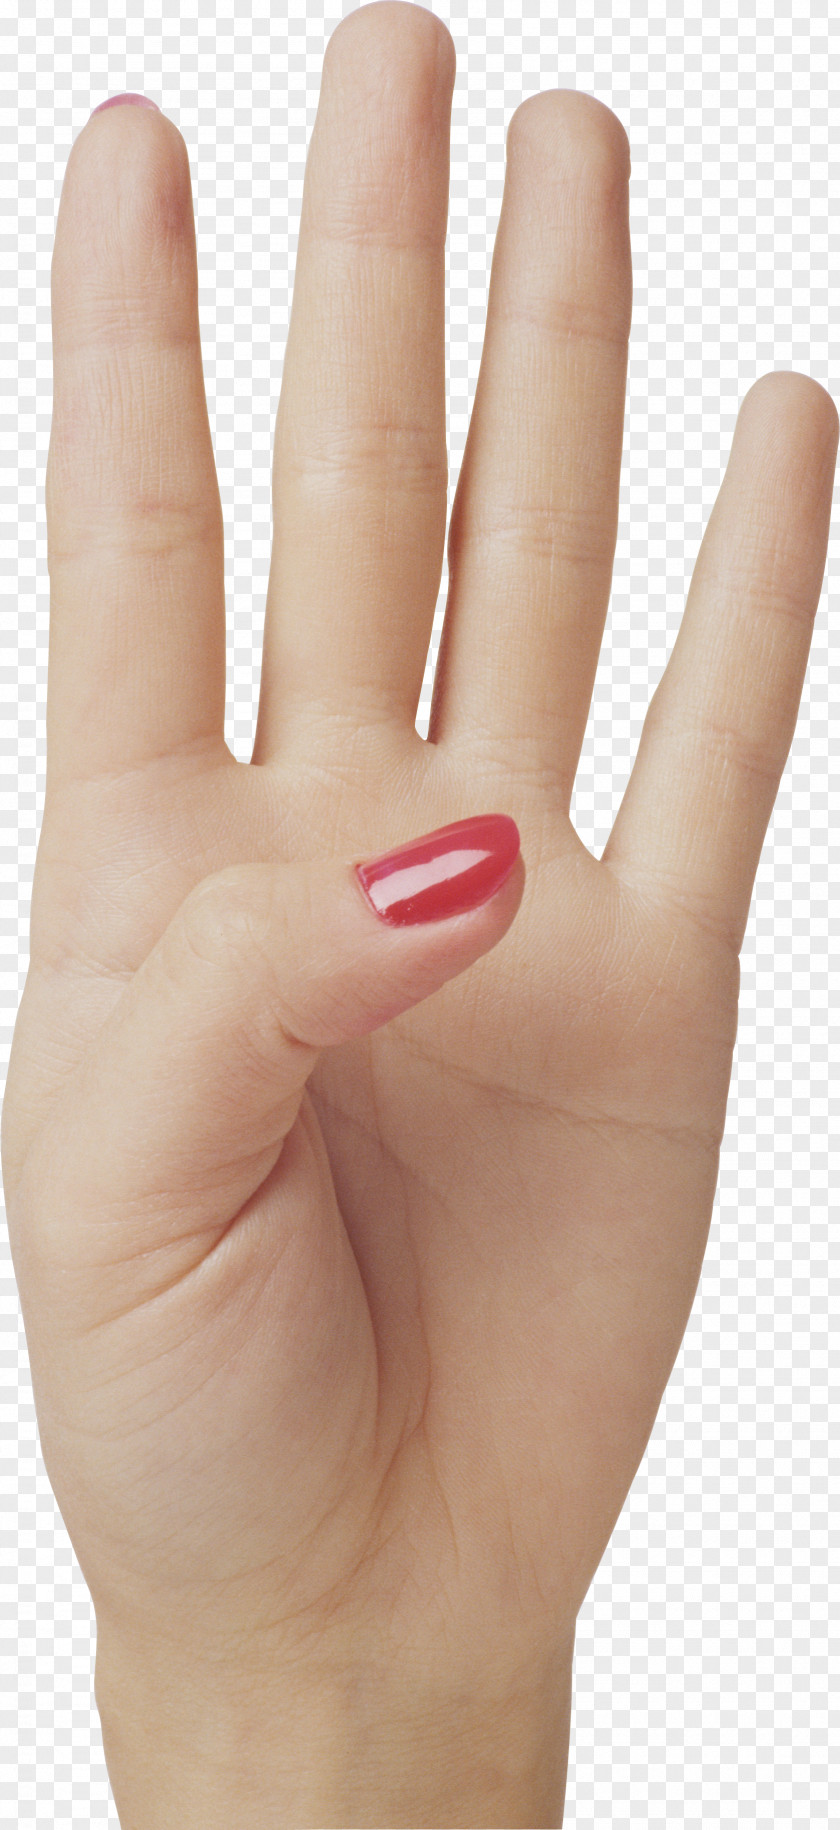 Hands , Hand Image Free Chunk Computer File PNG